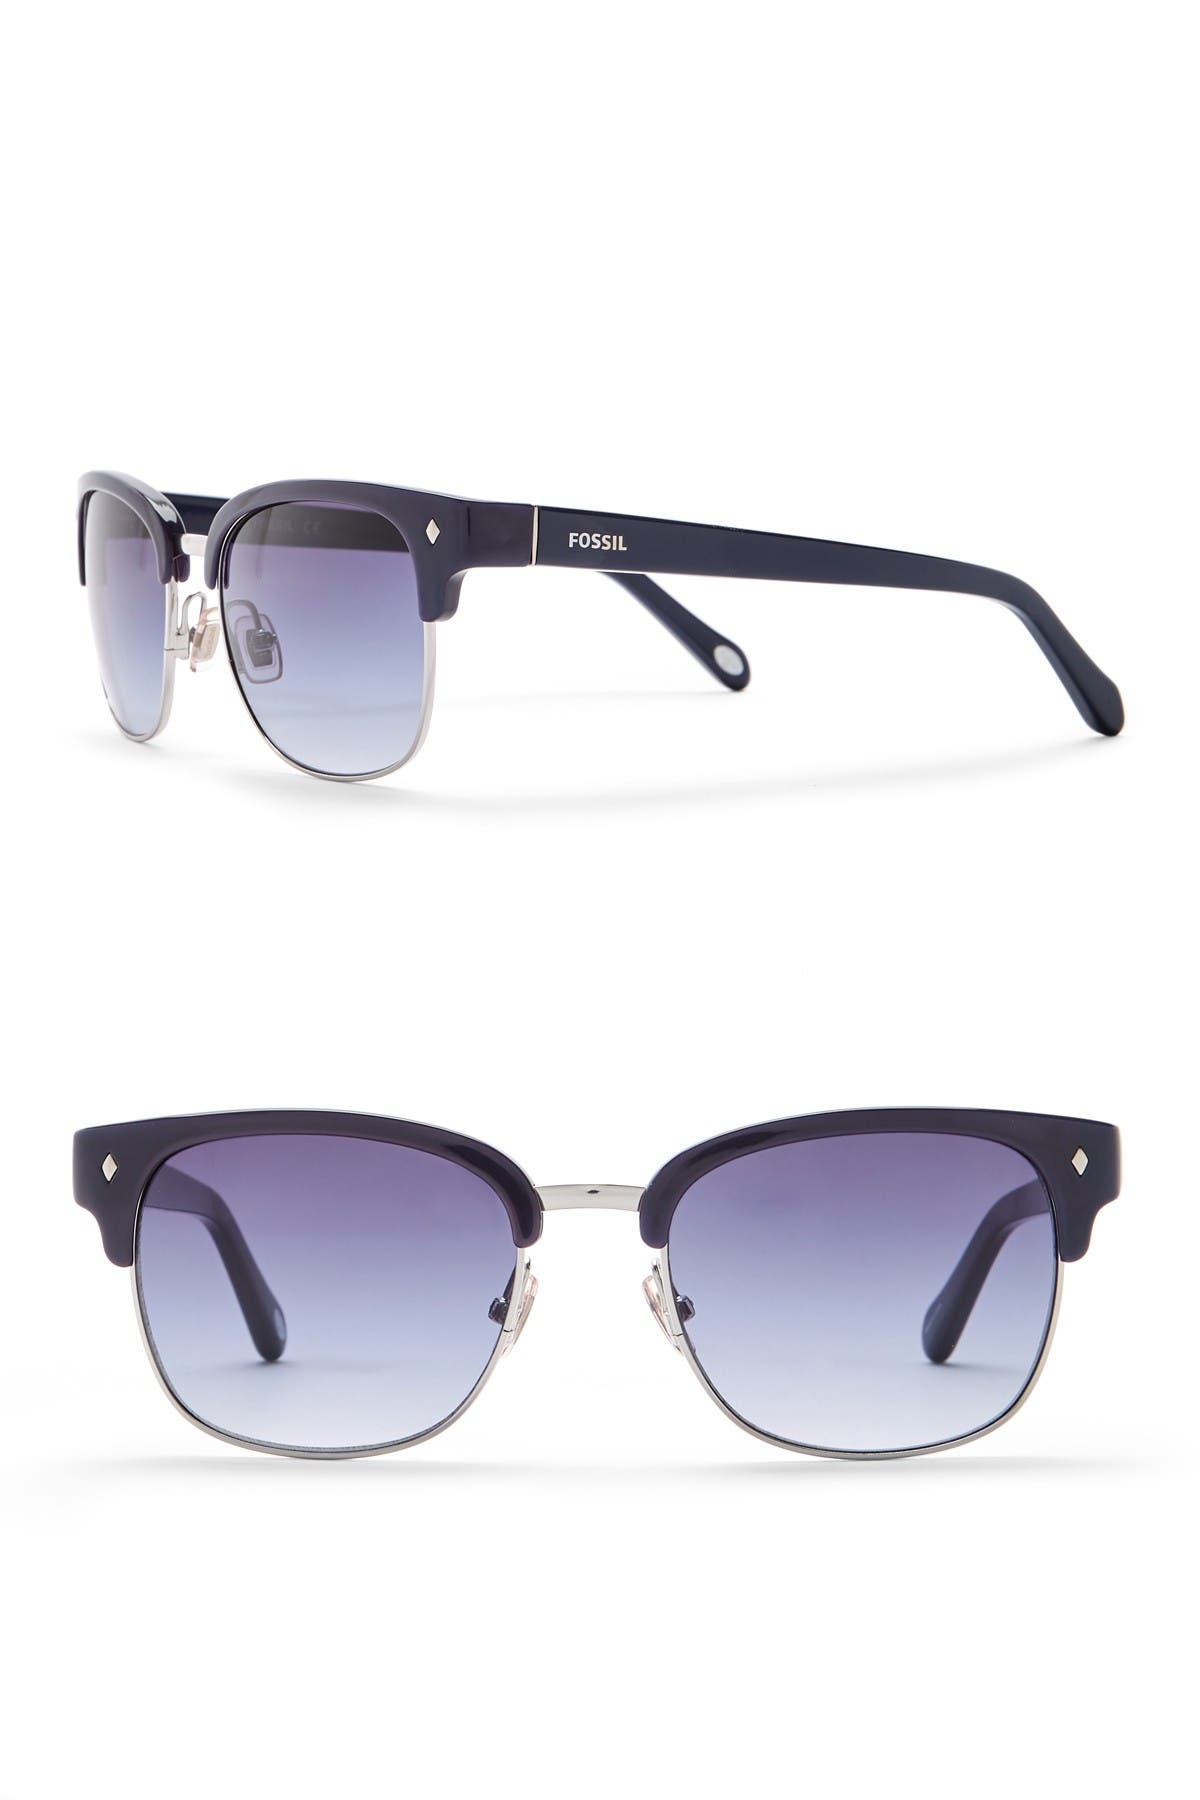 Fossil | Clubmaster 53mm Sunglasses 